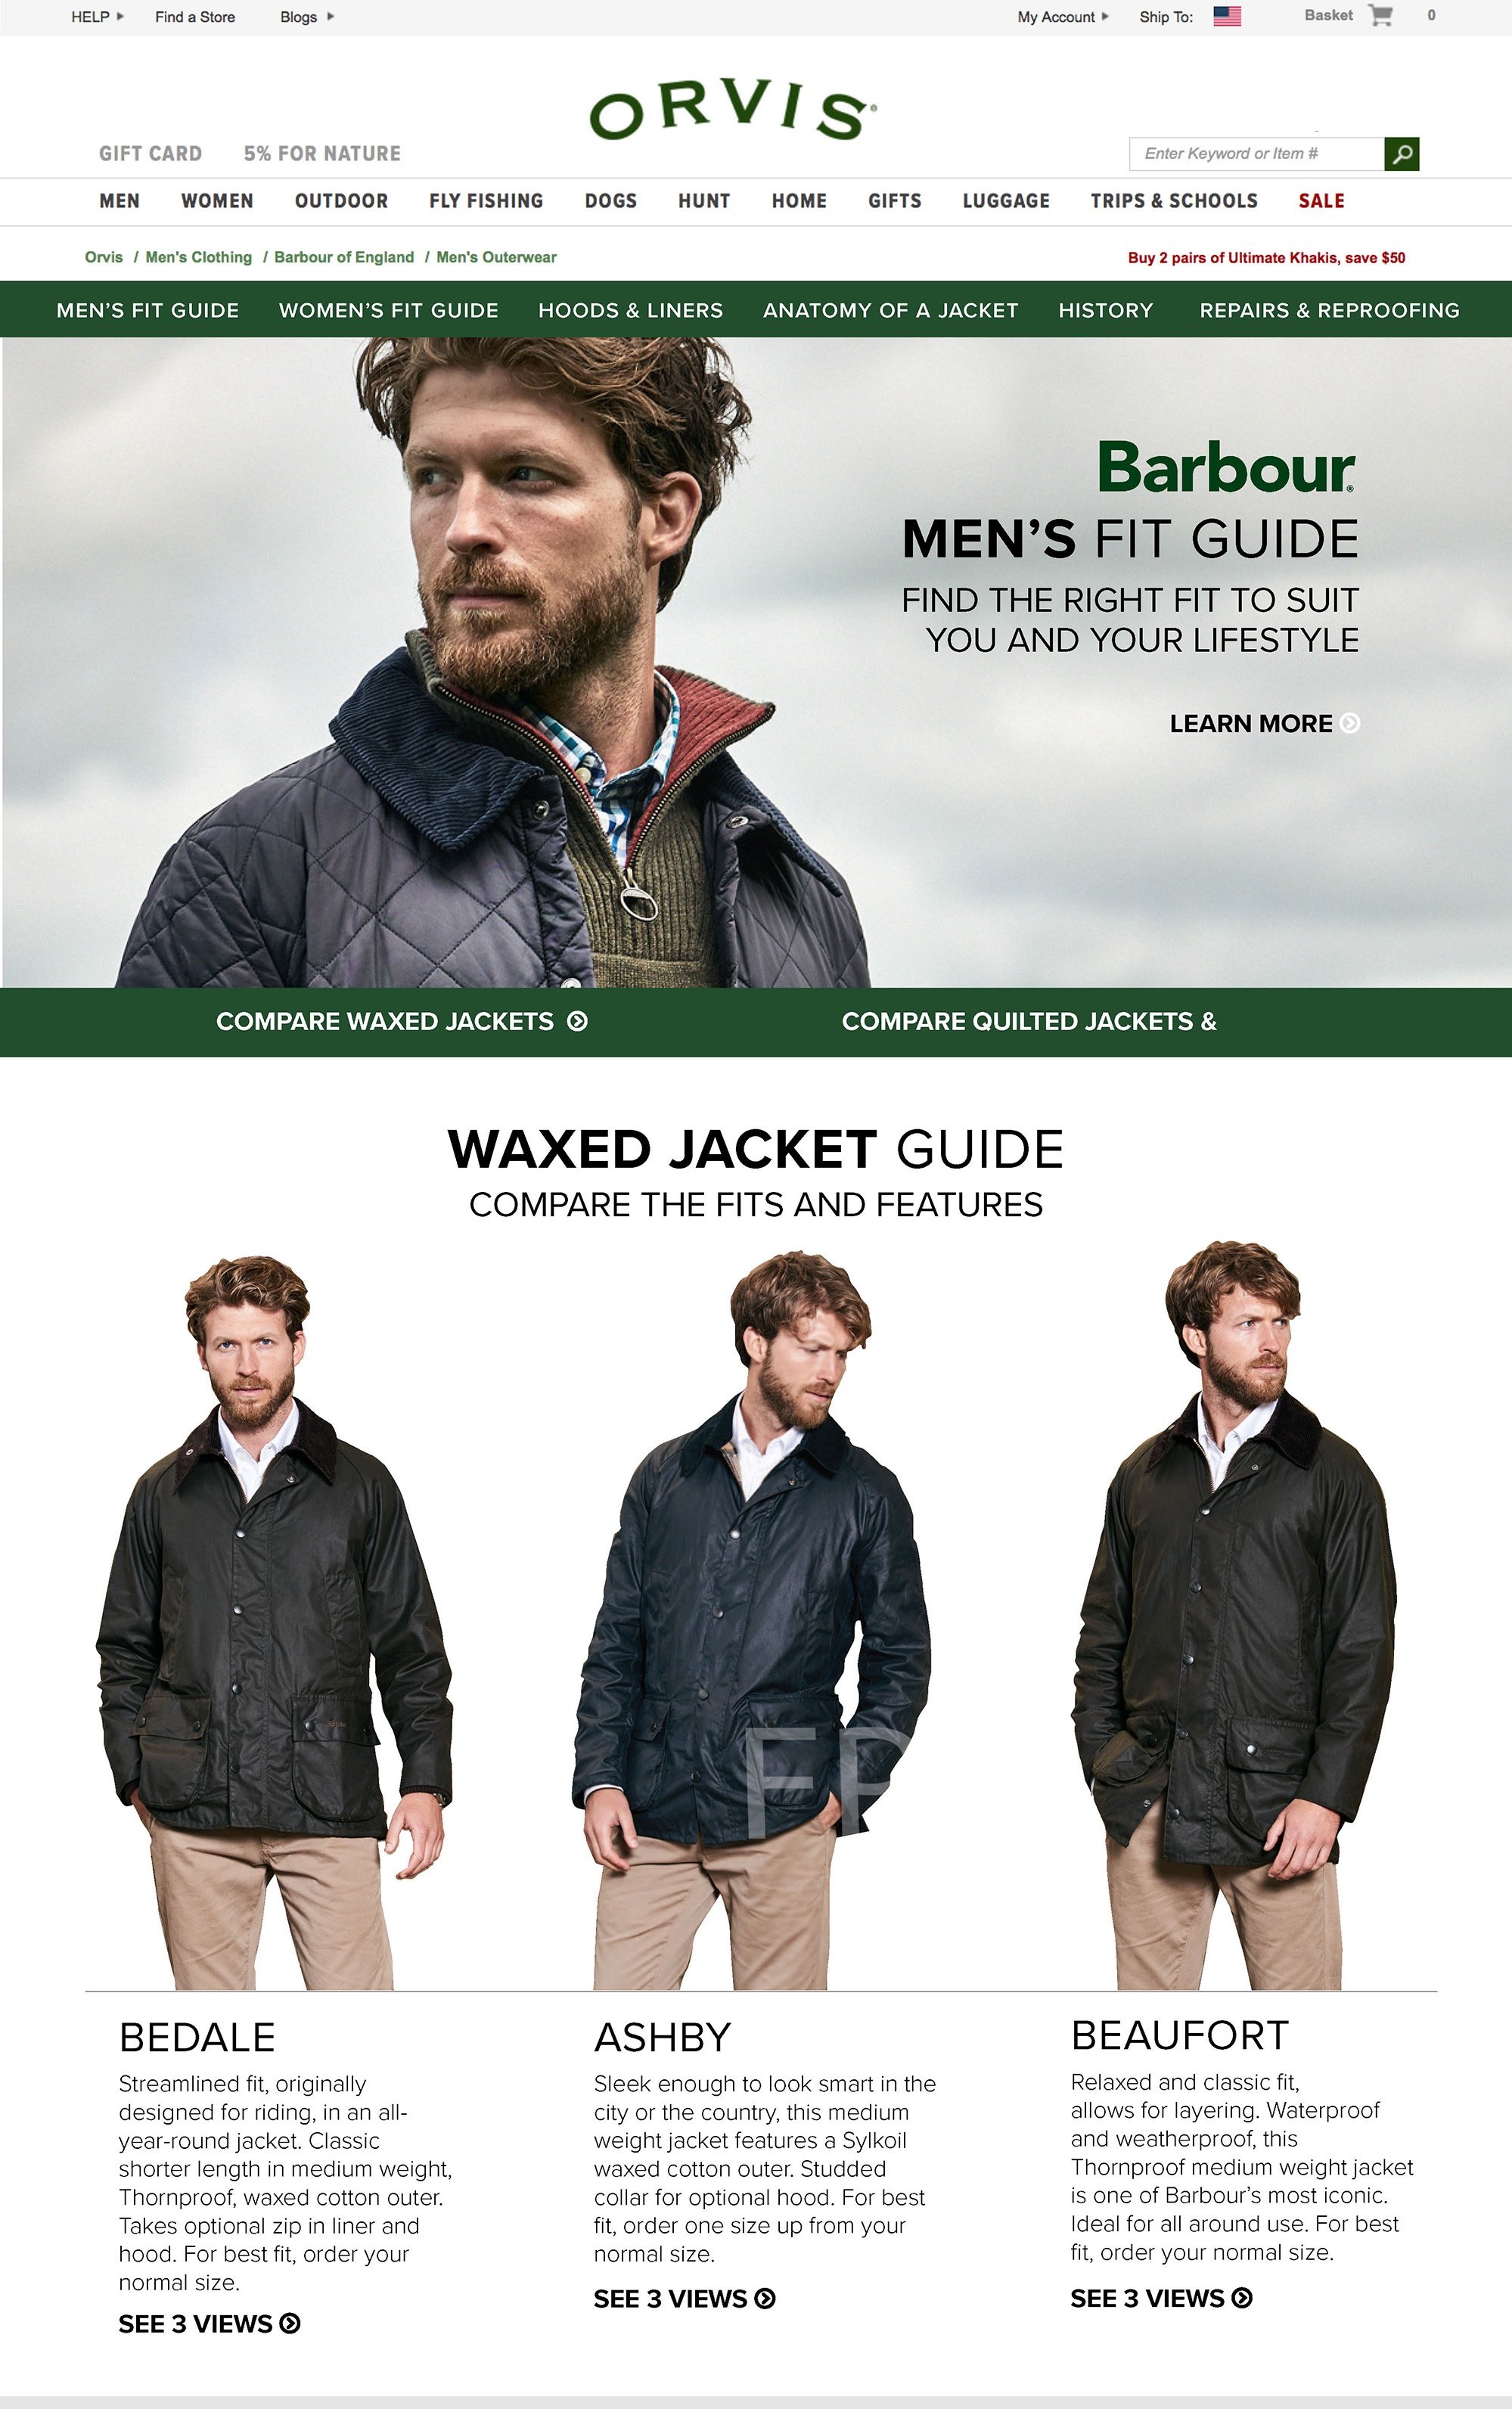 Barbour Guide_Men's fit_2_Page_1.jpg